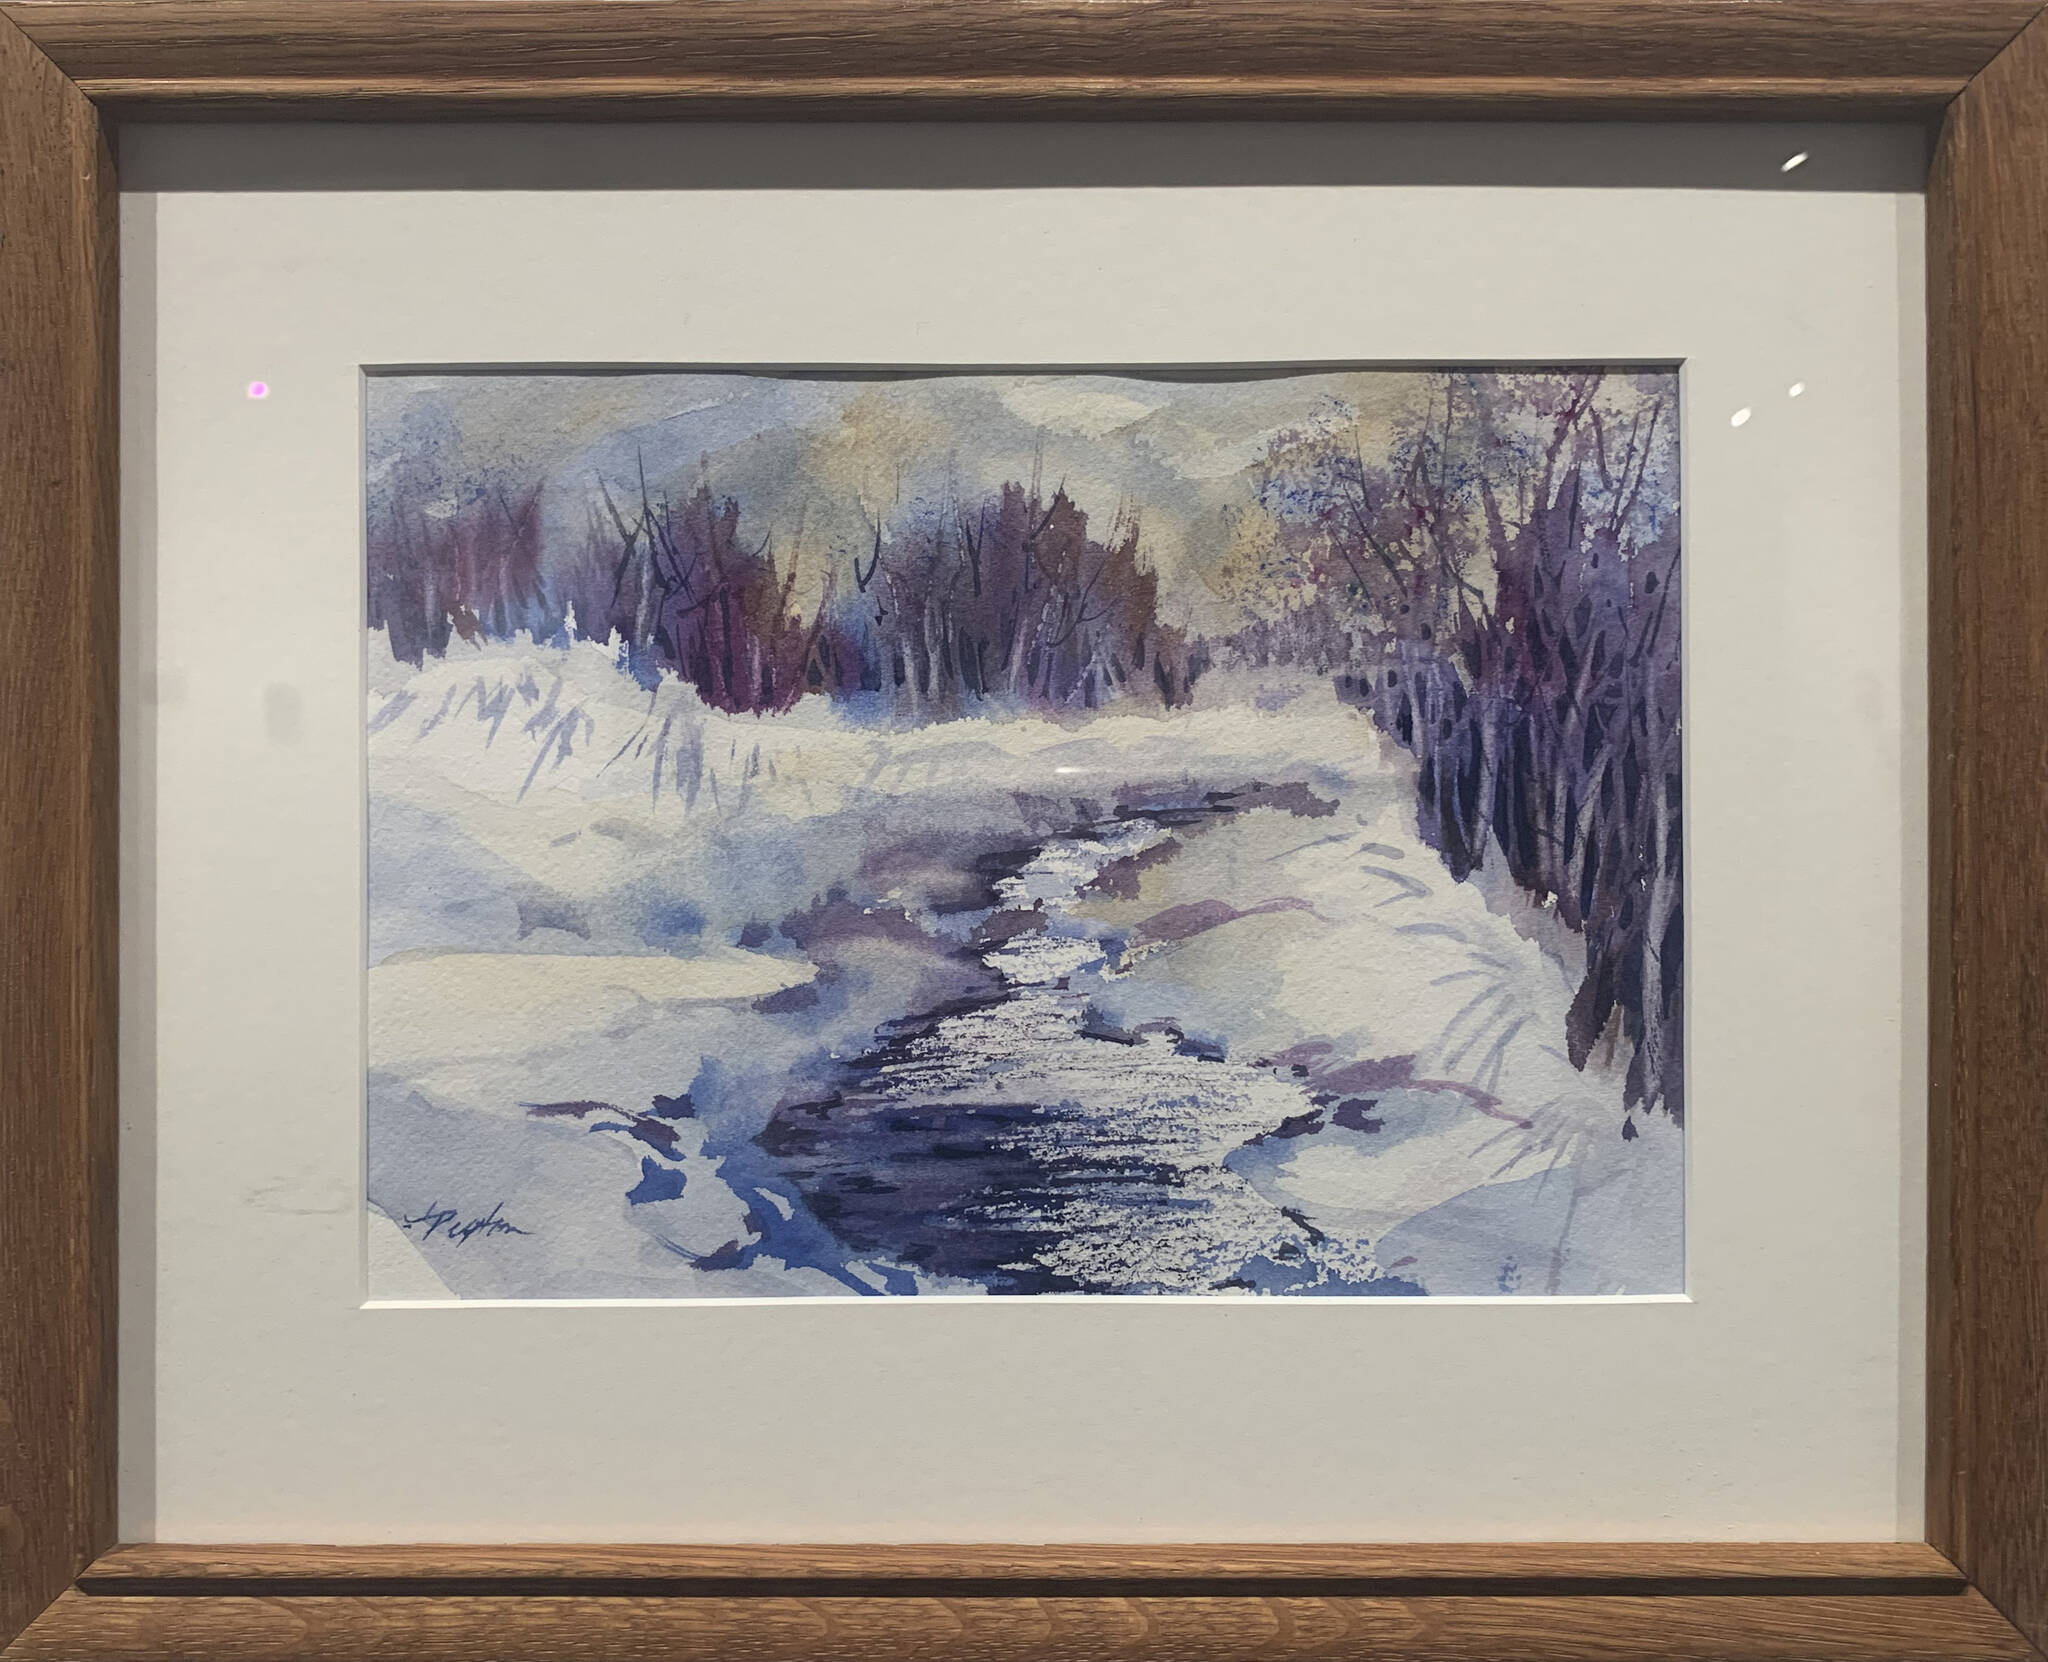 Still Flowing by Jan Peyton on display at SPH gallery (Photo provided)